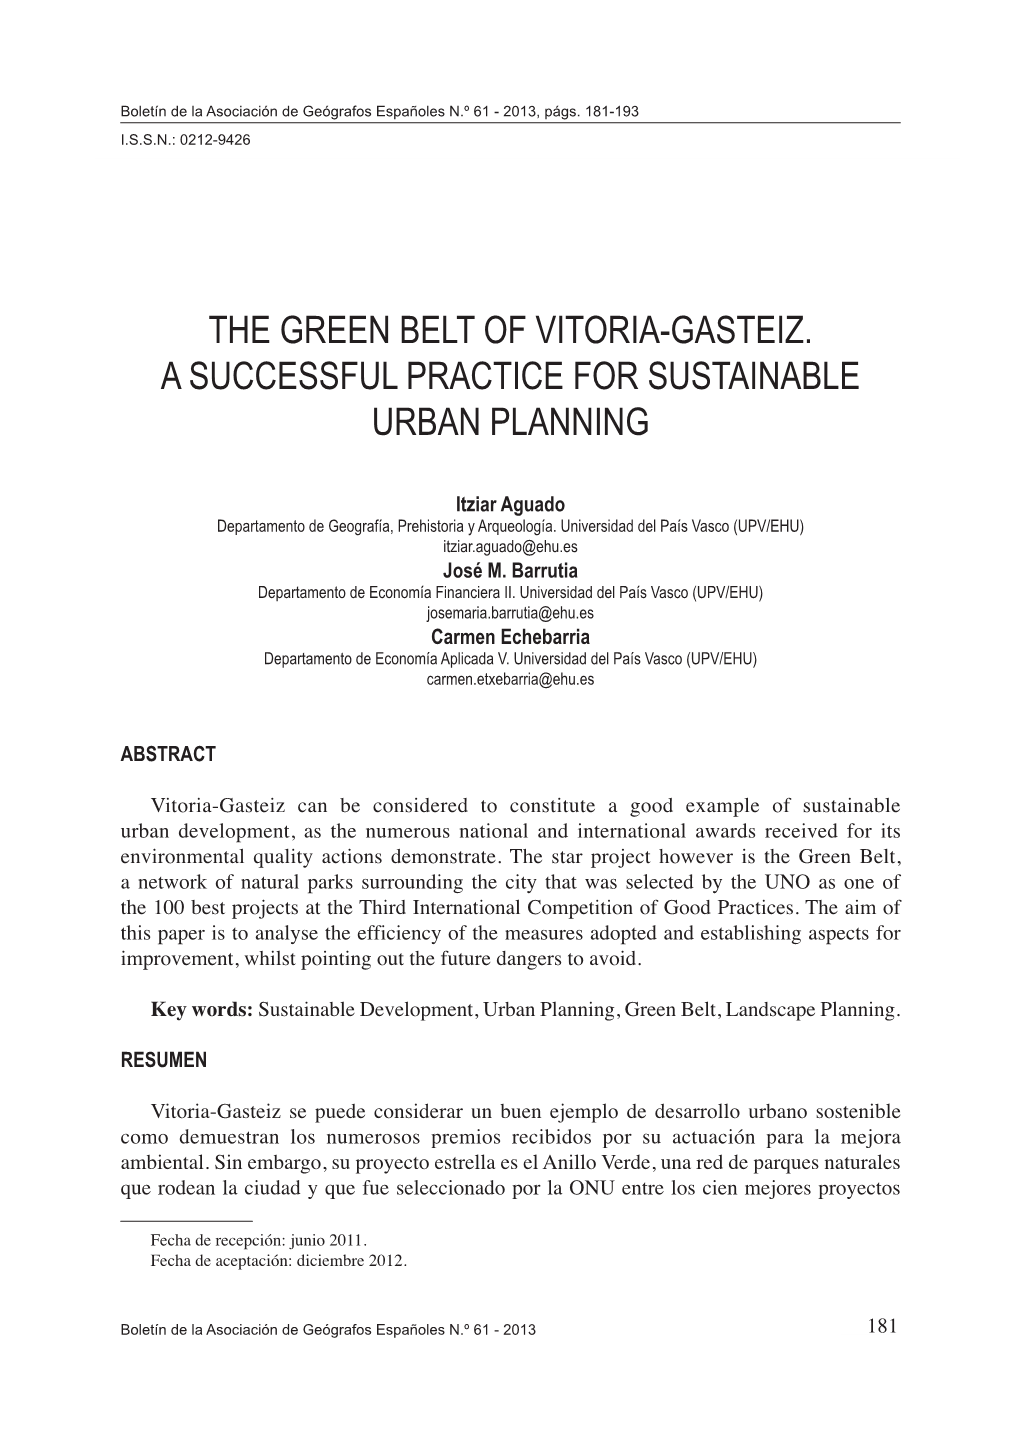 The Green Belt of Vitoria-Gasteiz. a Successful Practice for Sustainable Urban Planning